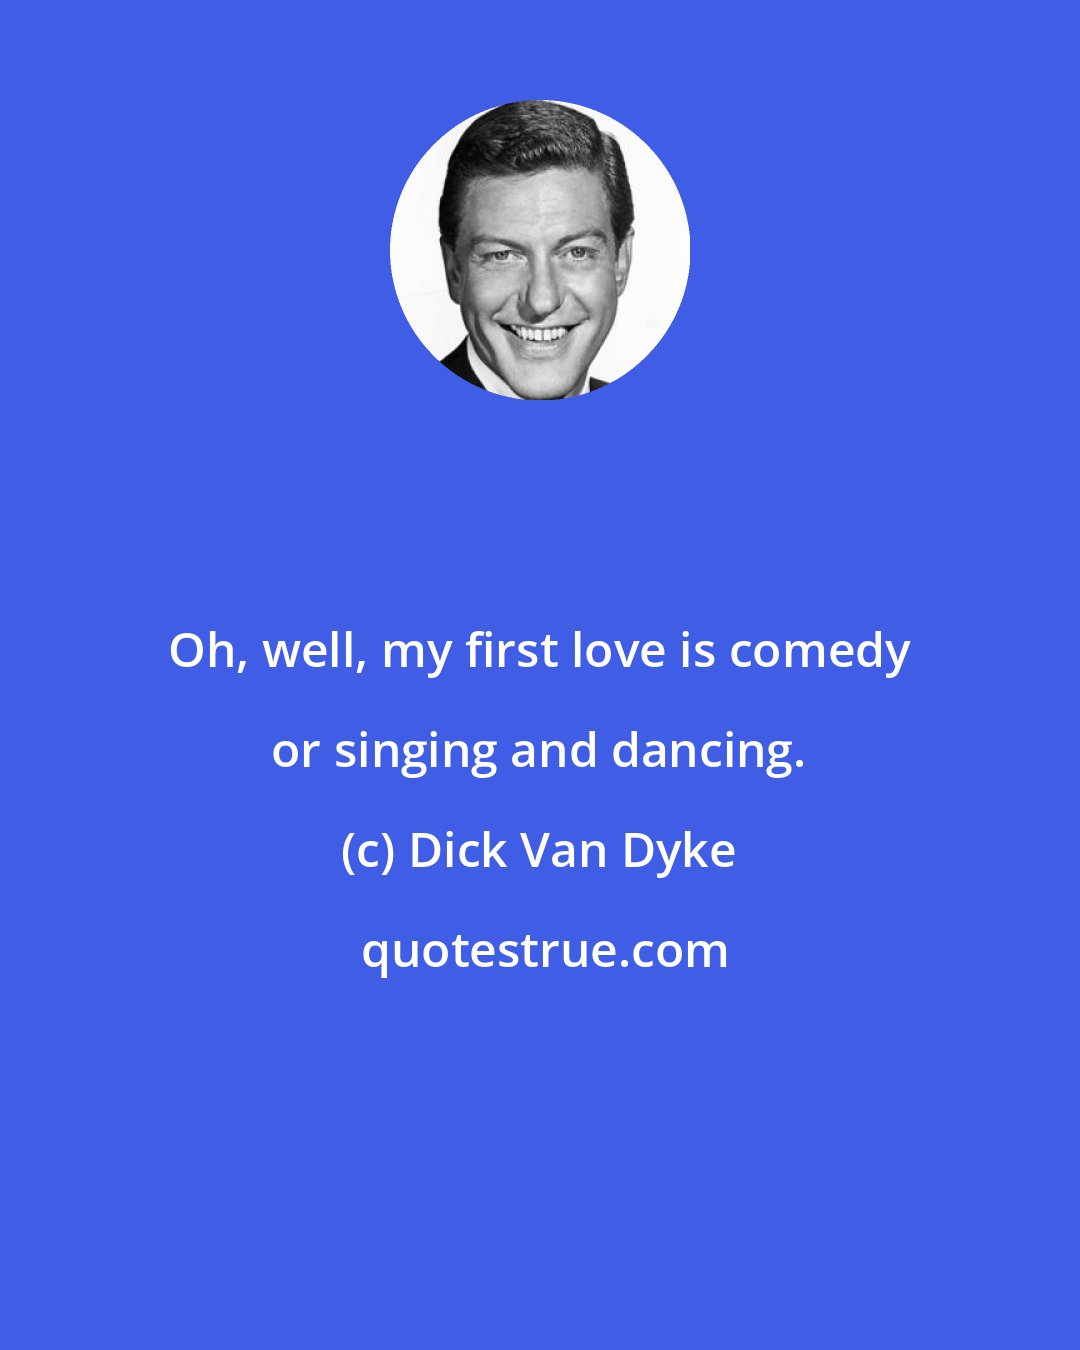 Dick Van Dyke: Oh, well, my first love is comedy or singing and dancing.